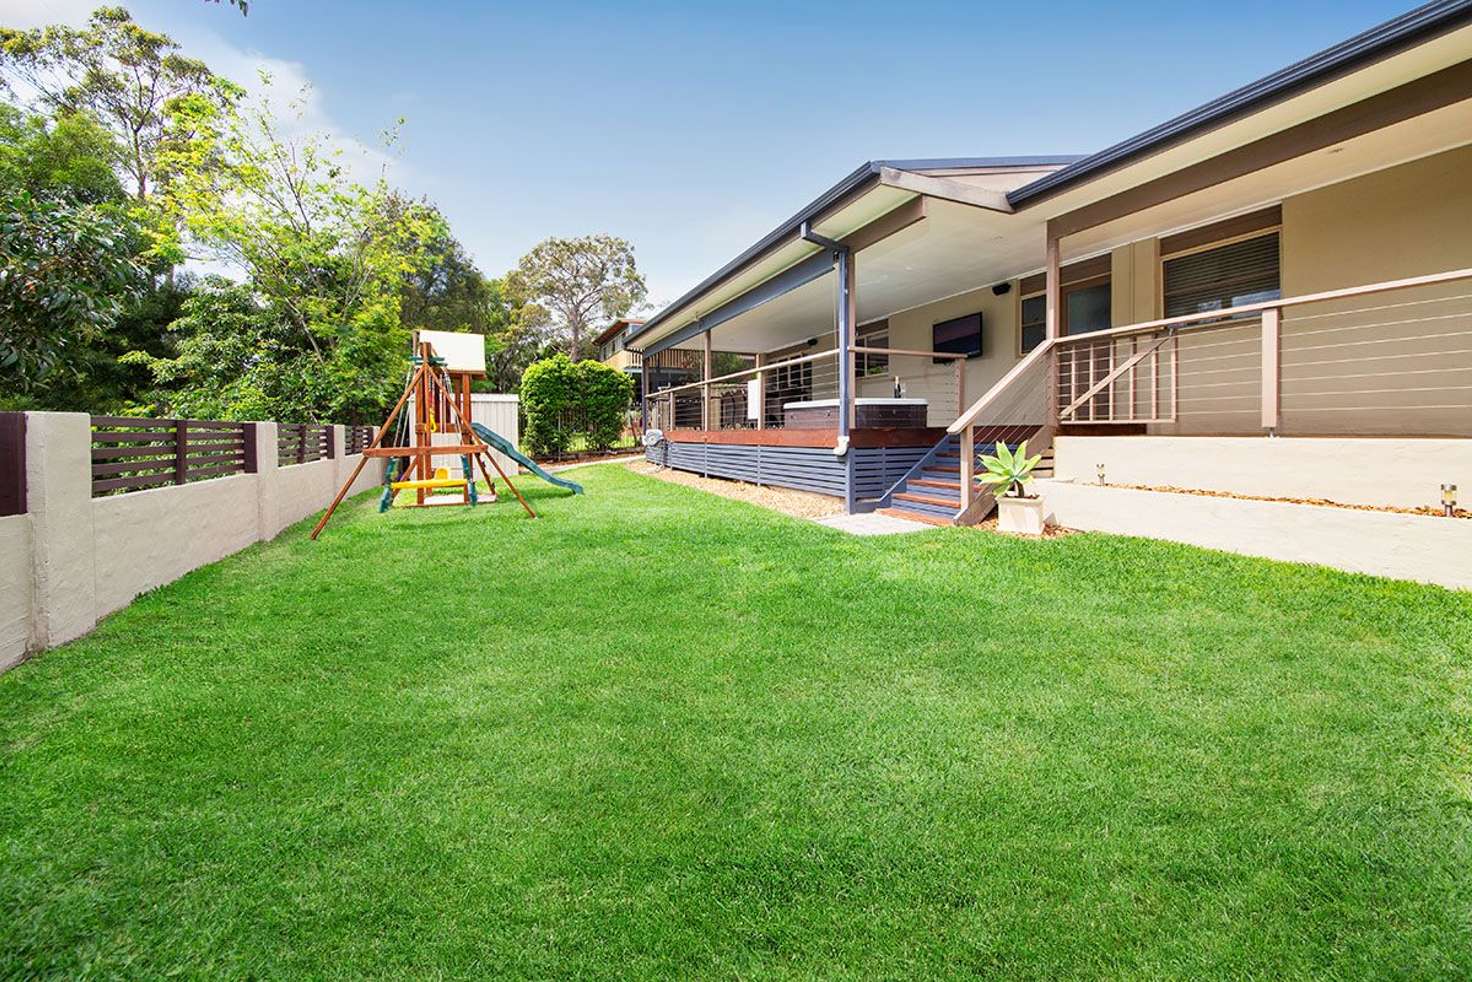 Main view of Homely house listing, 10 Tagudi Place, Bangor NSW 2234